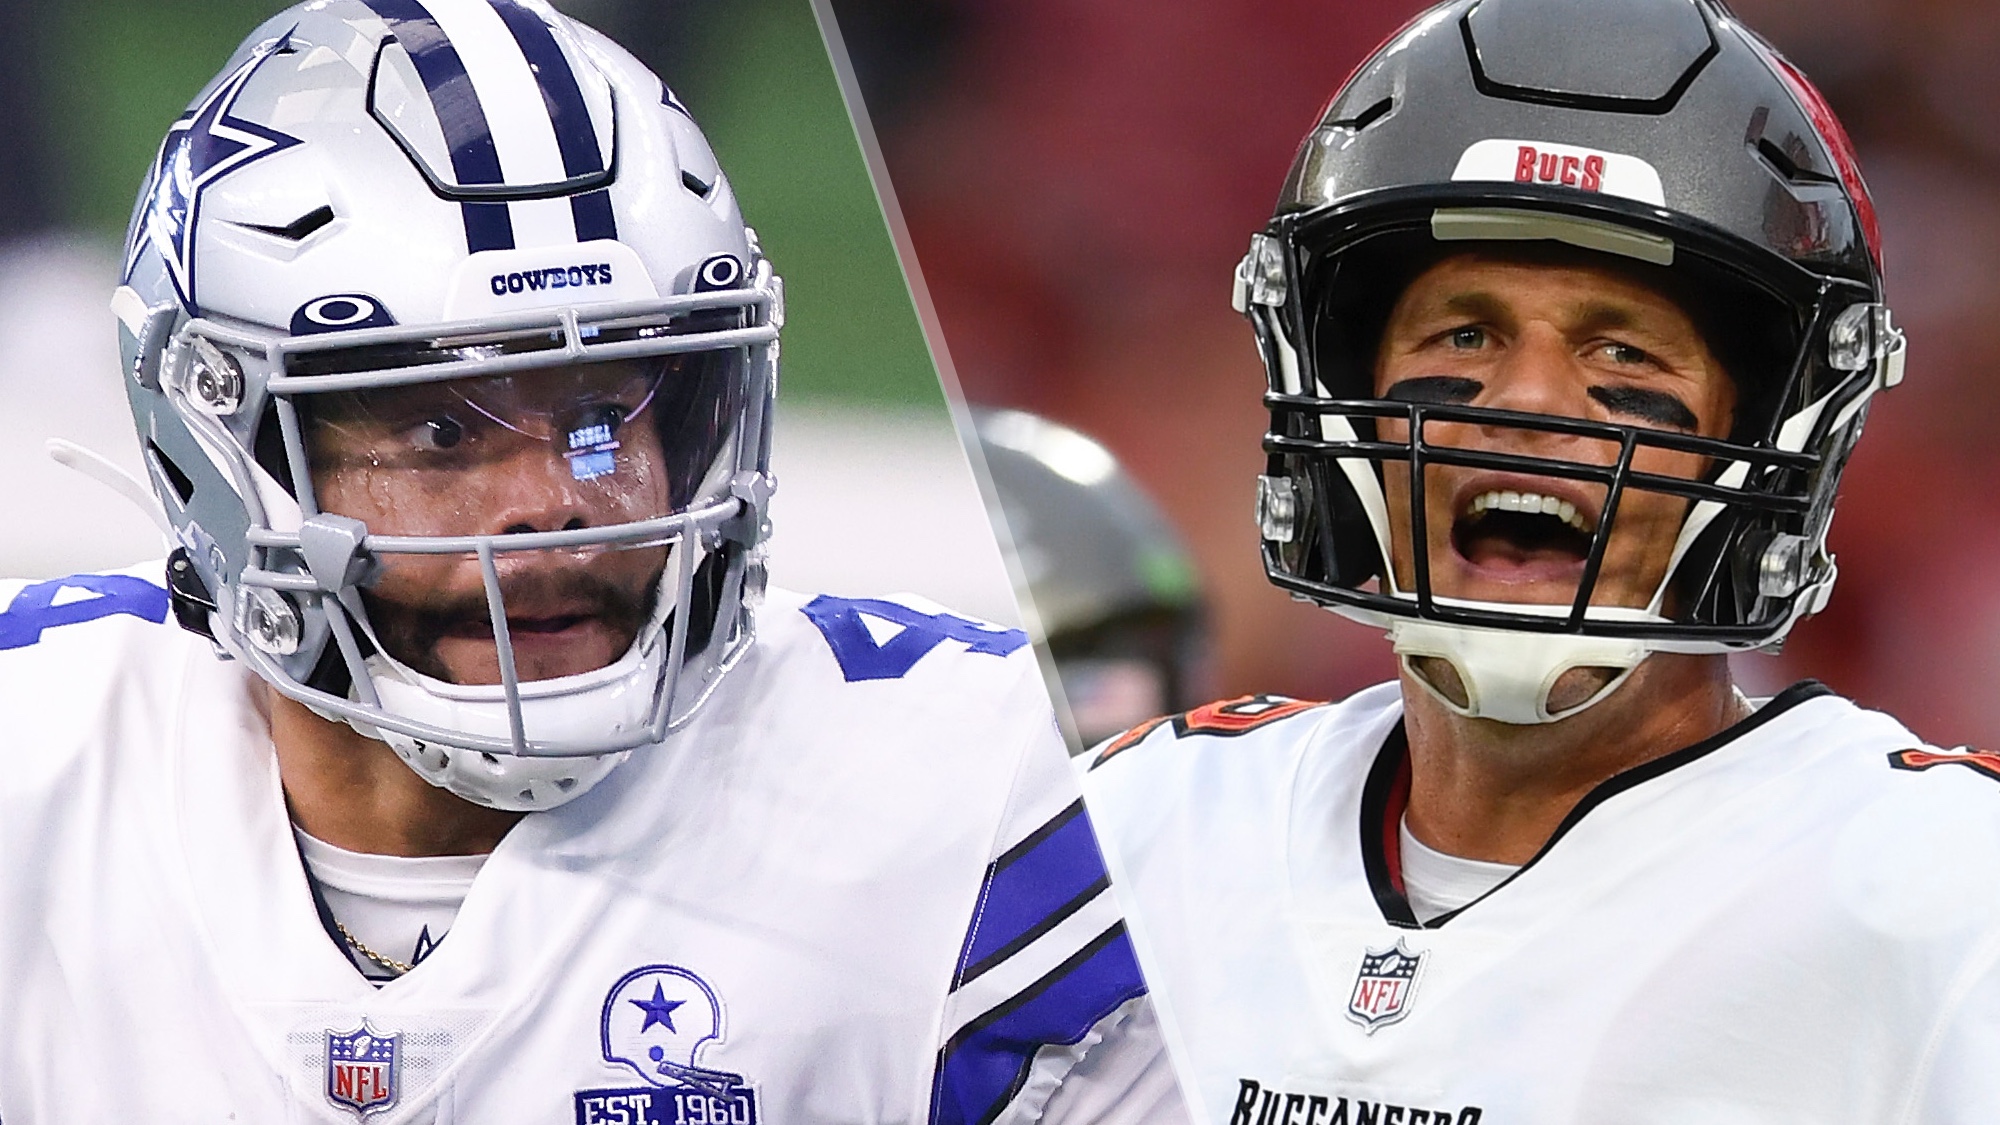 Cowboys vs Buccaneers live stream — how to watch Thursday Night